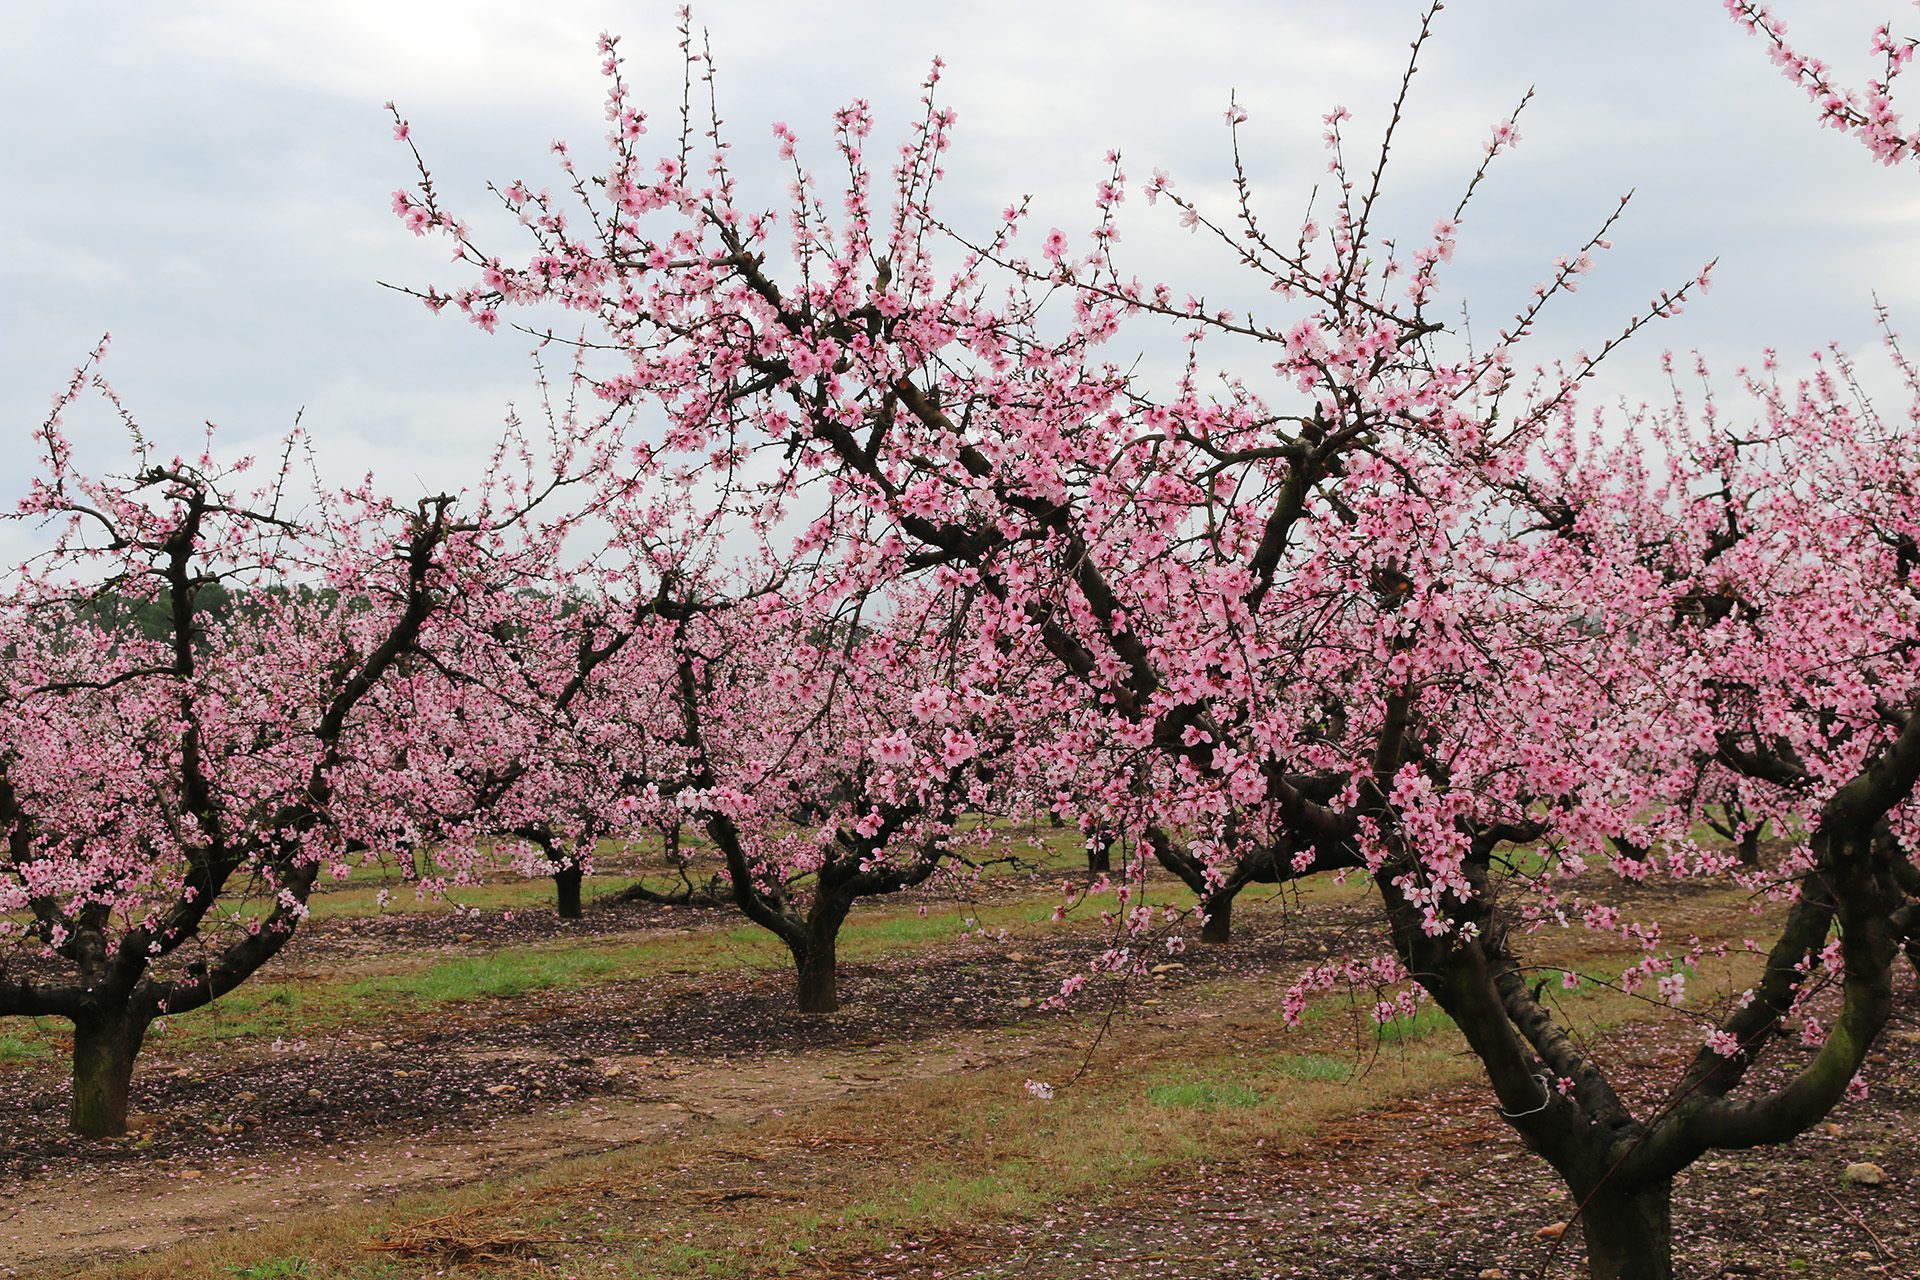 Peach trees in bloom at Musser Farm.